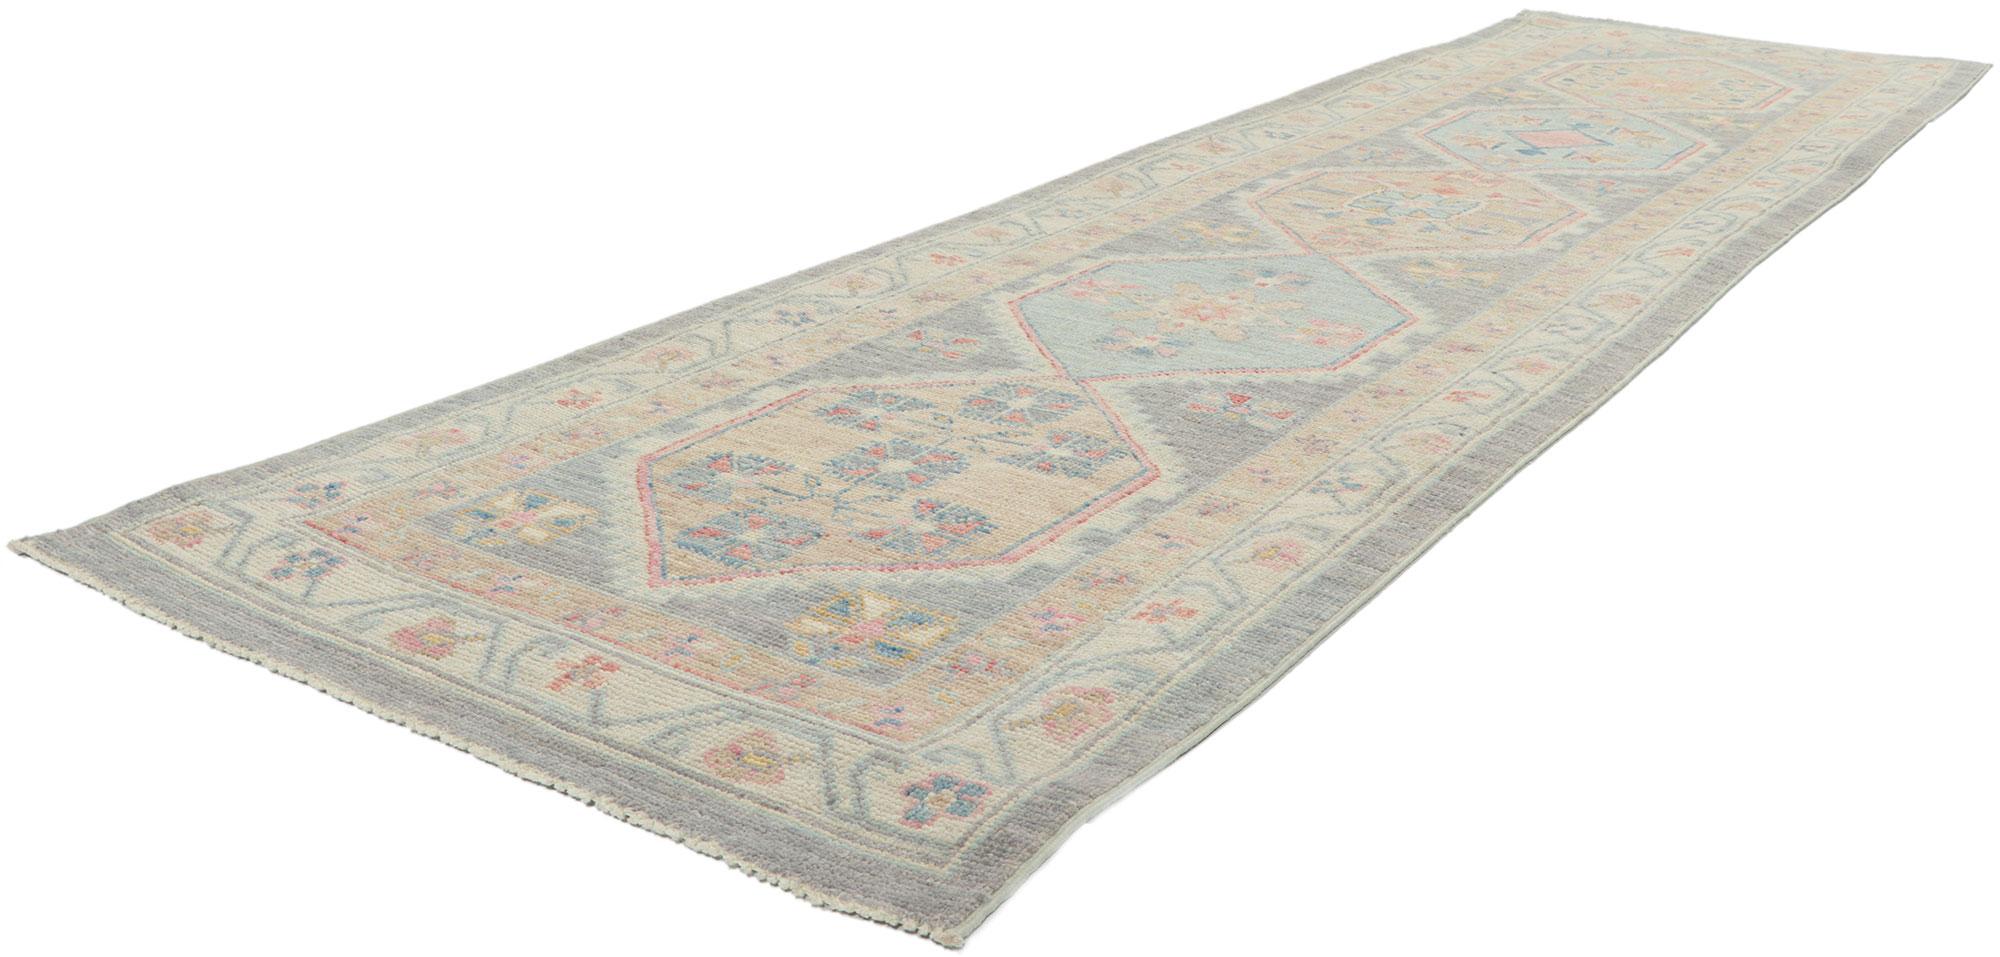 80833 New contemporary oushak runner with soft colors, 02'07 x 09'09. The classic style and soft colors are tranquil and sophisticated. With its timeless design and understated elegance, this versatile Oushak carpet runner will create a welcoming